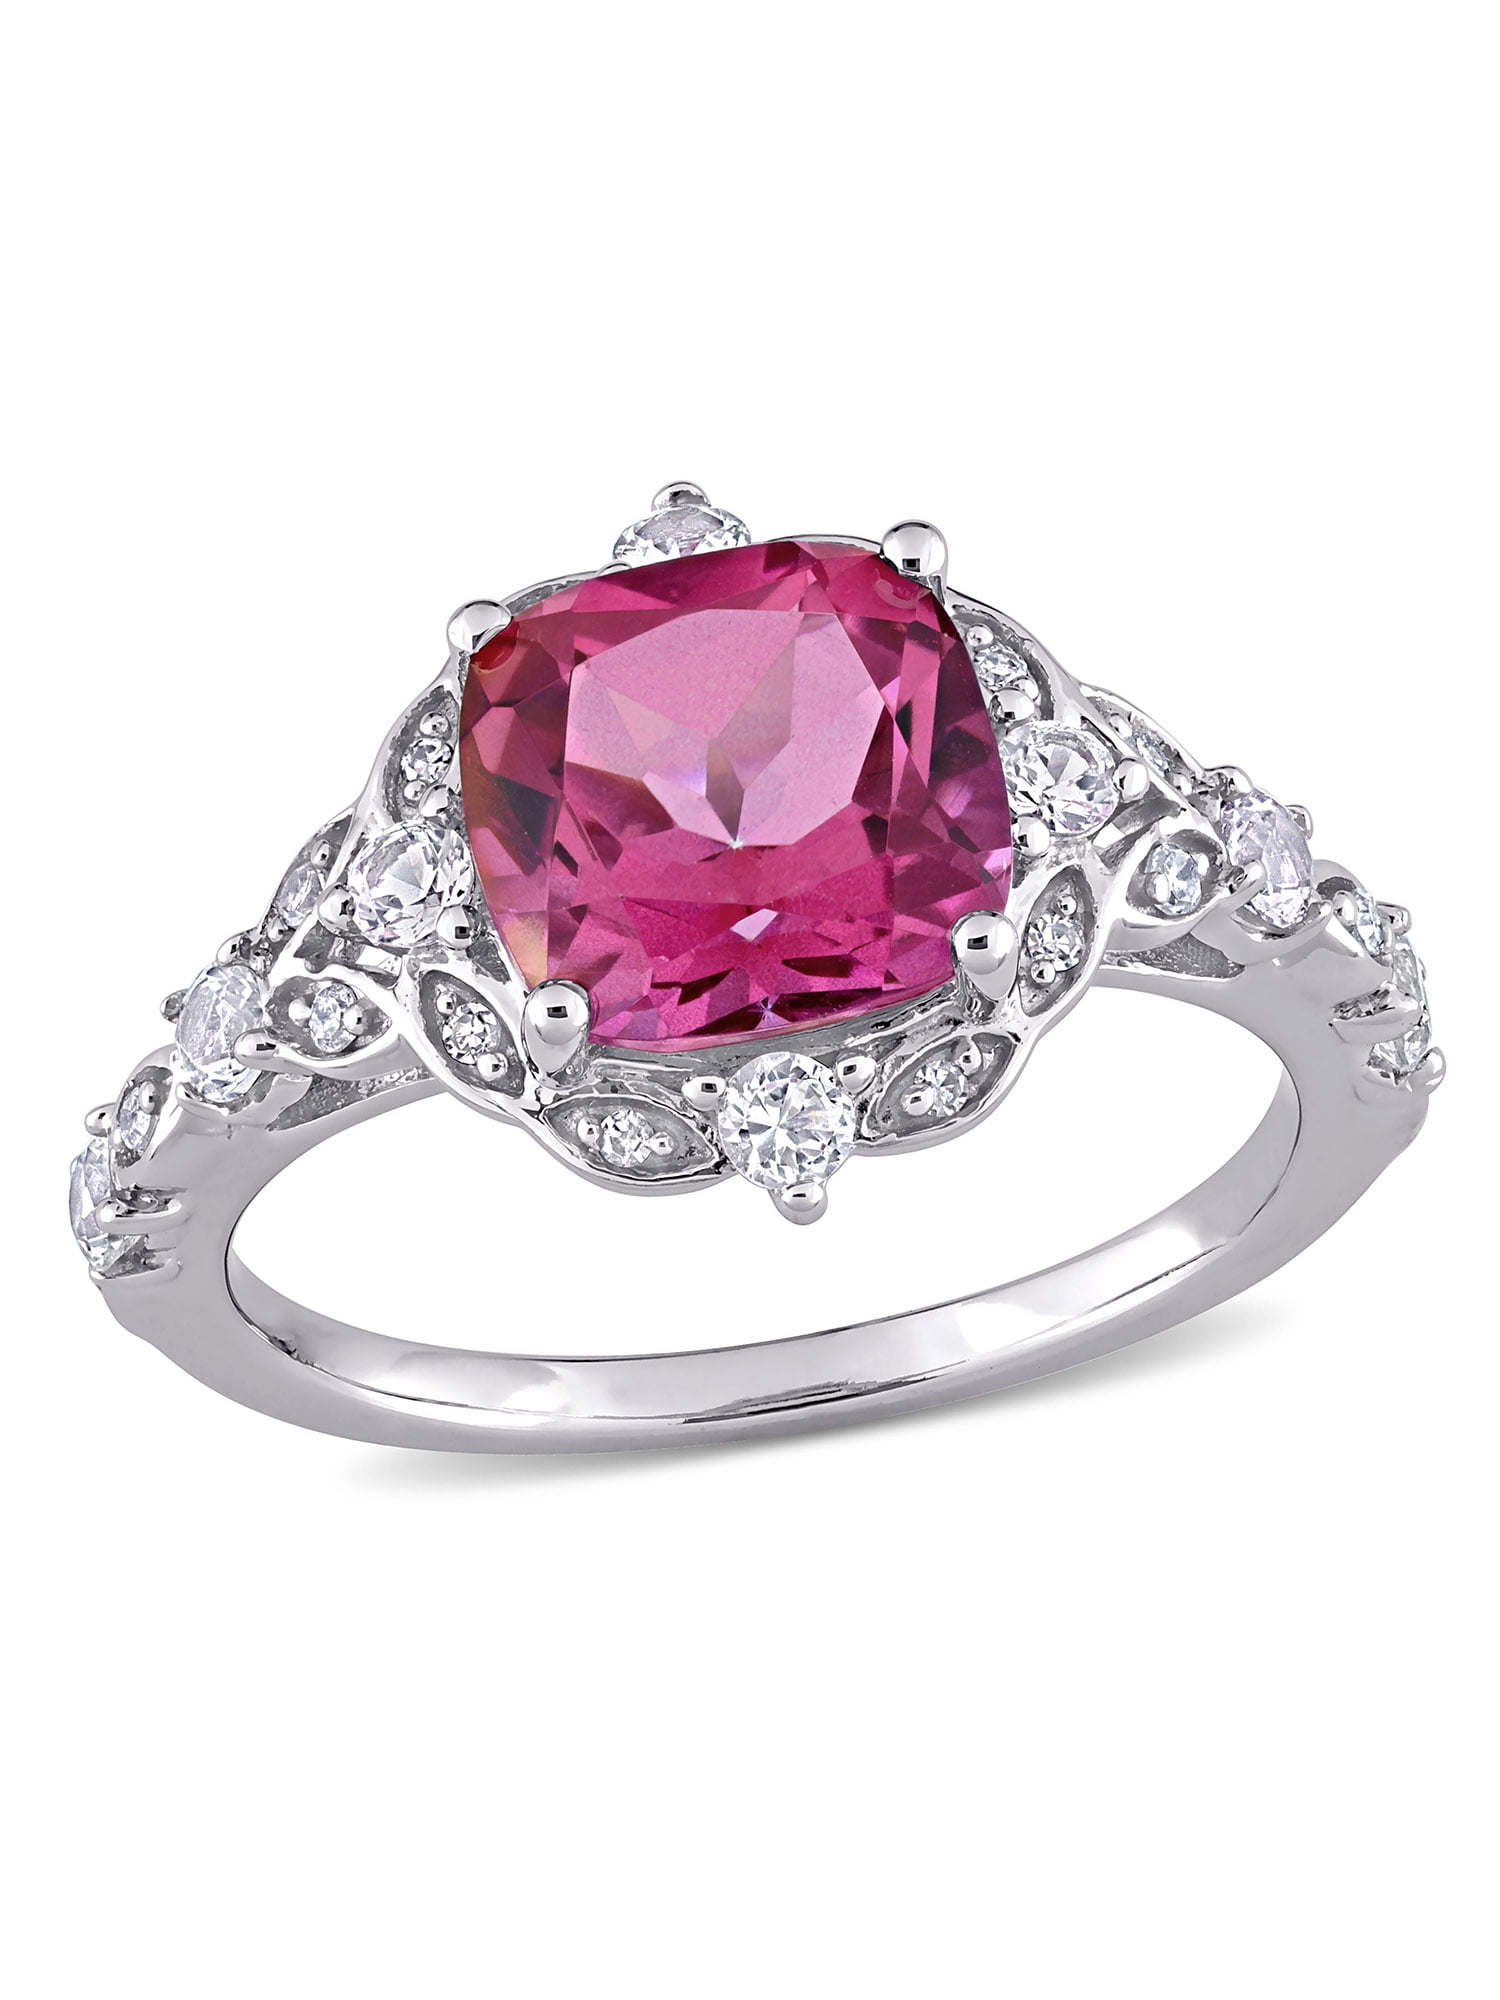 Legally Blonde 2 Style 1.5 Carat Pink Oval Cubic Zirconia Trillion  Solitaire Engagement Ring